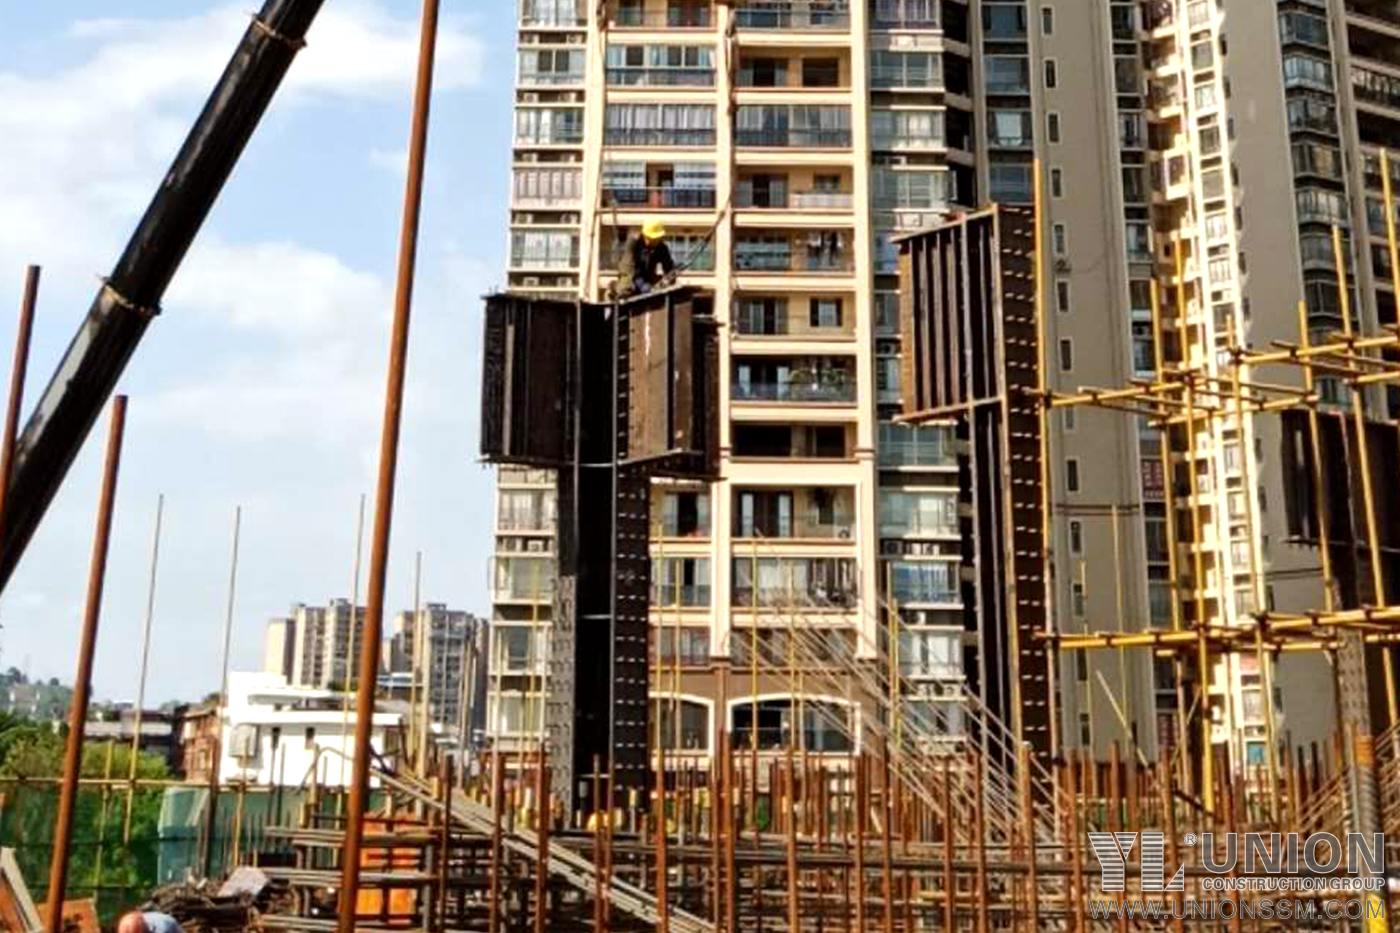 Steel Reinforcing Columns and Beams for High-rise Residence Buildings - structure steel fabrication